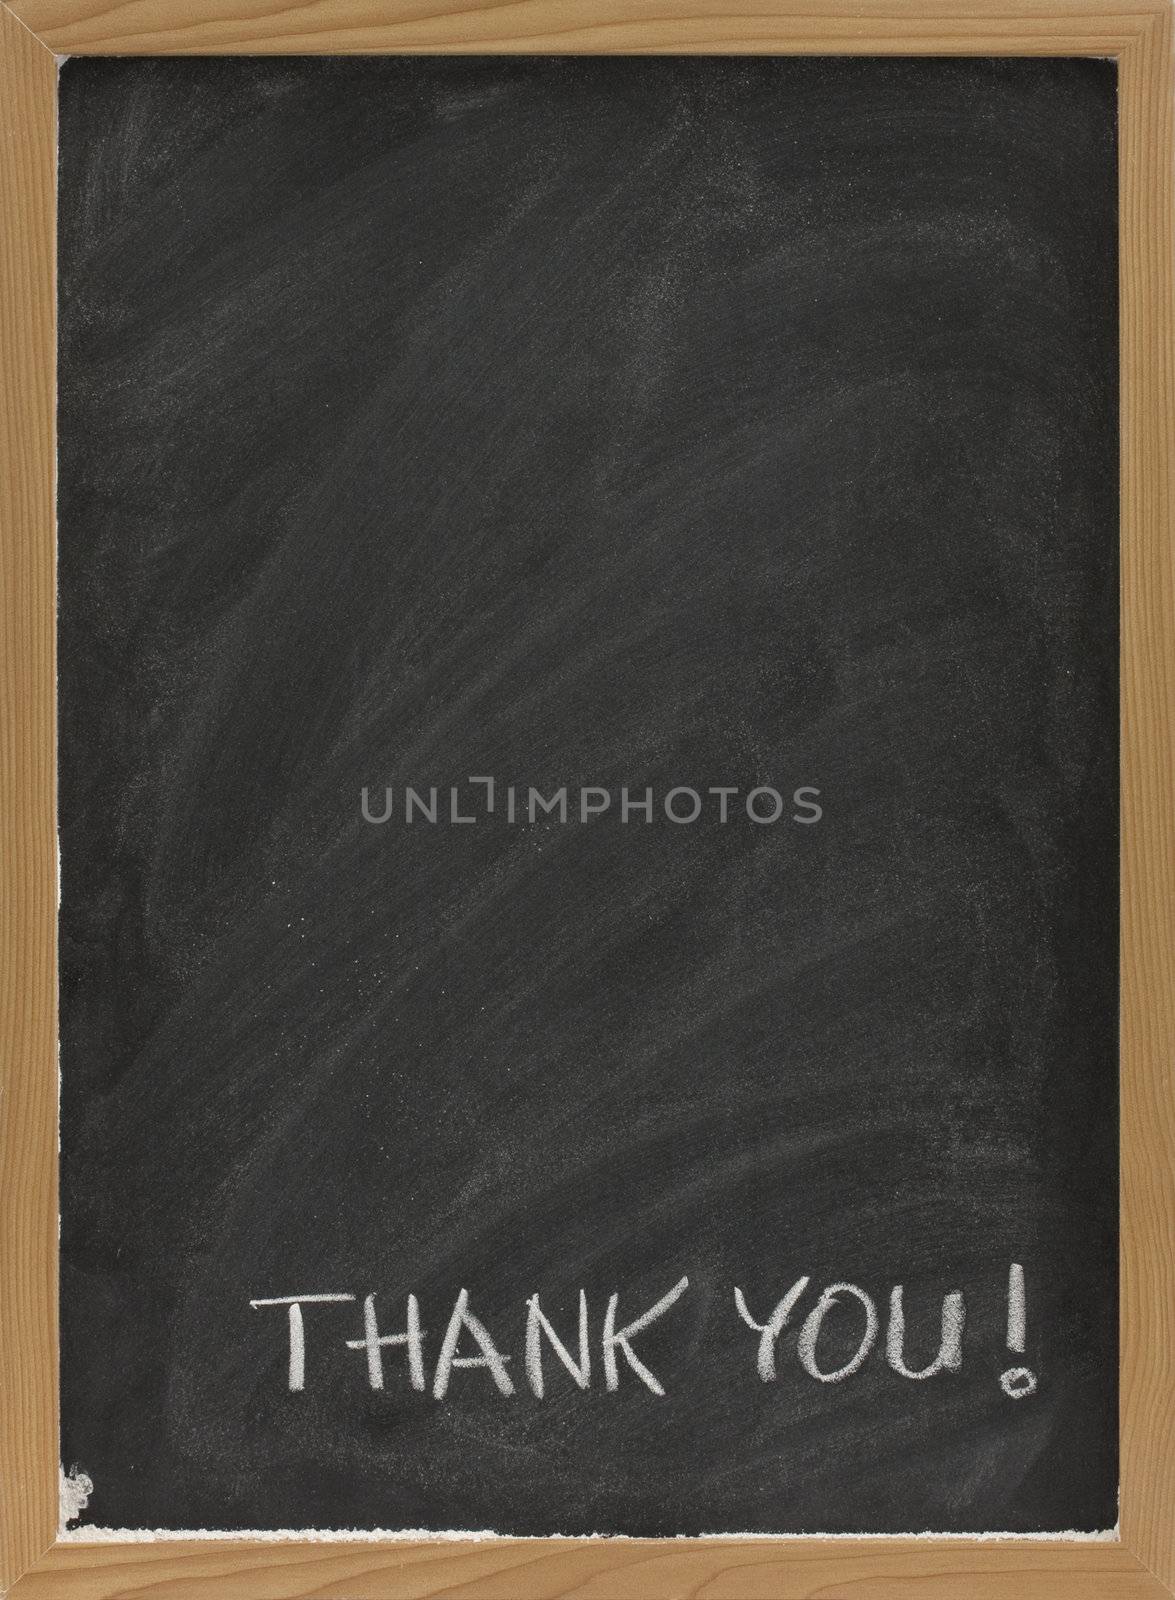 thank you handwritten with white chalk on blank blackboard with eraser smudges